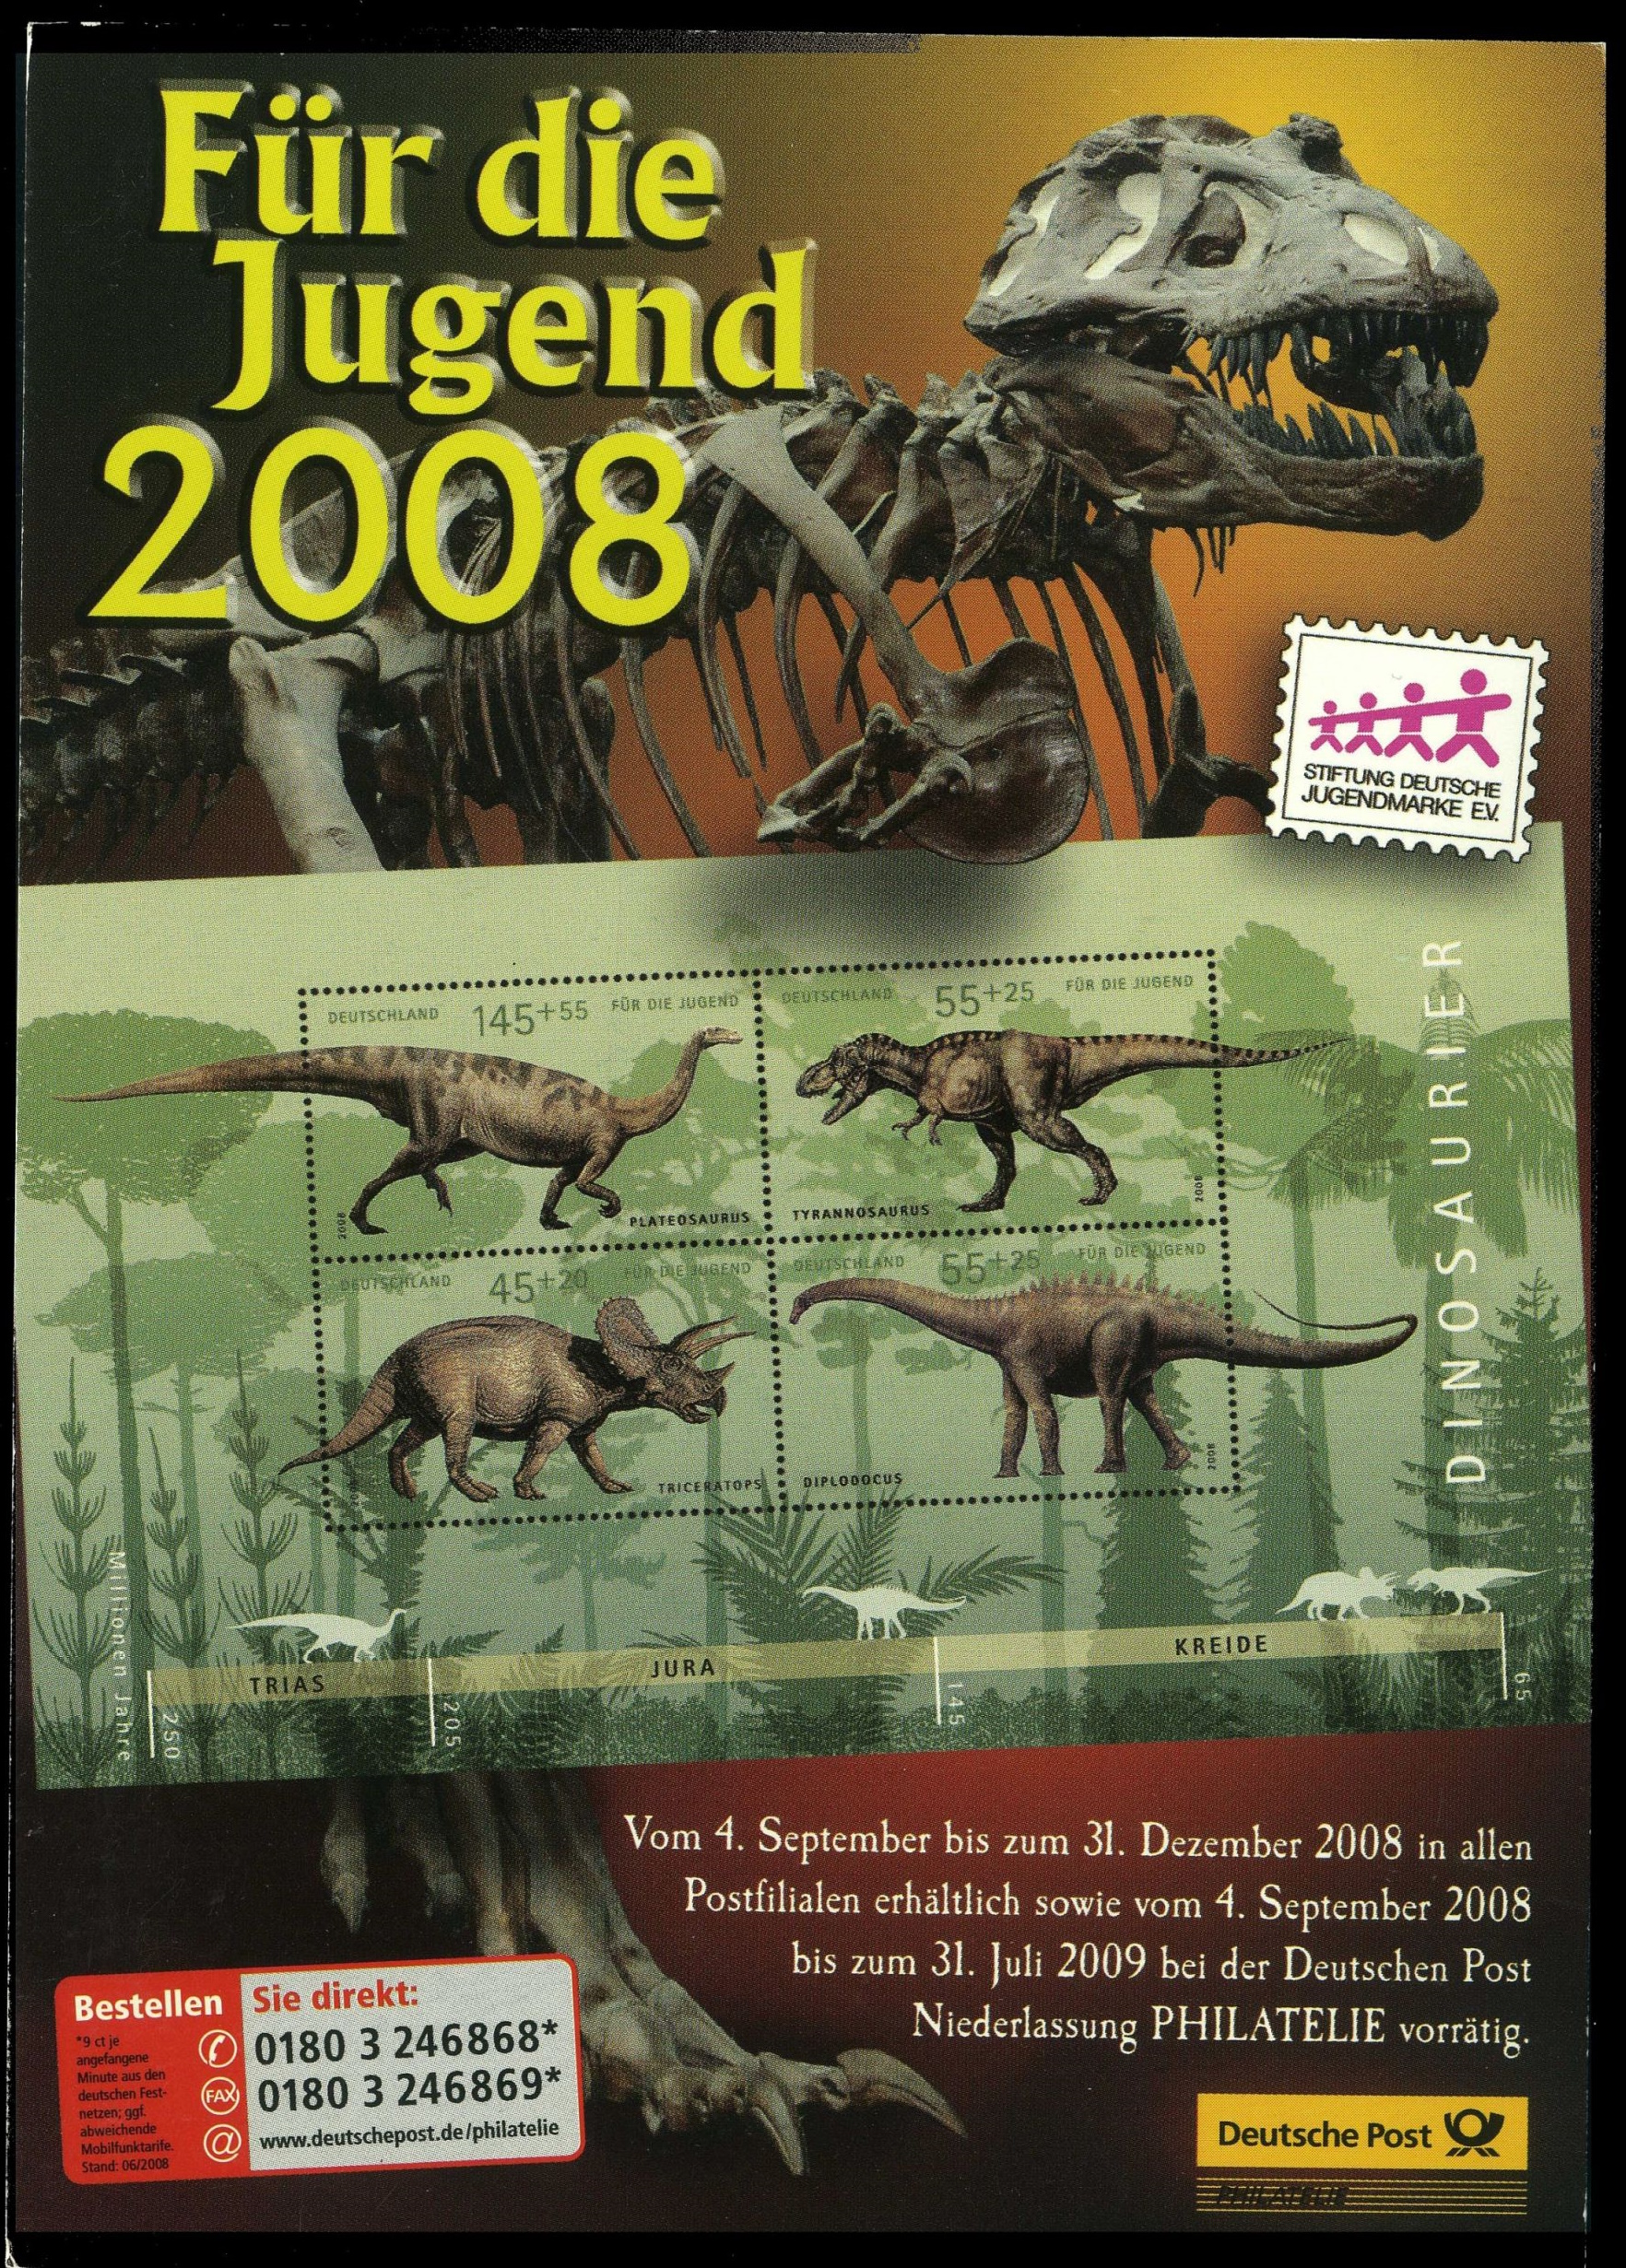 Promotional postcard of Deutsche Post, informed collectors about the issue of dinosaur stamps